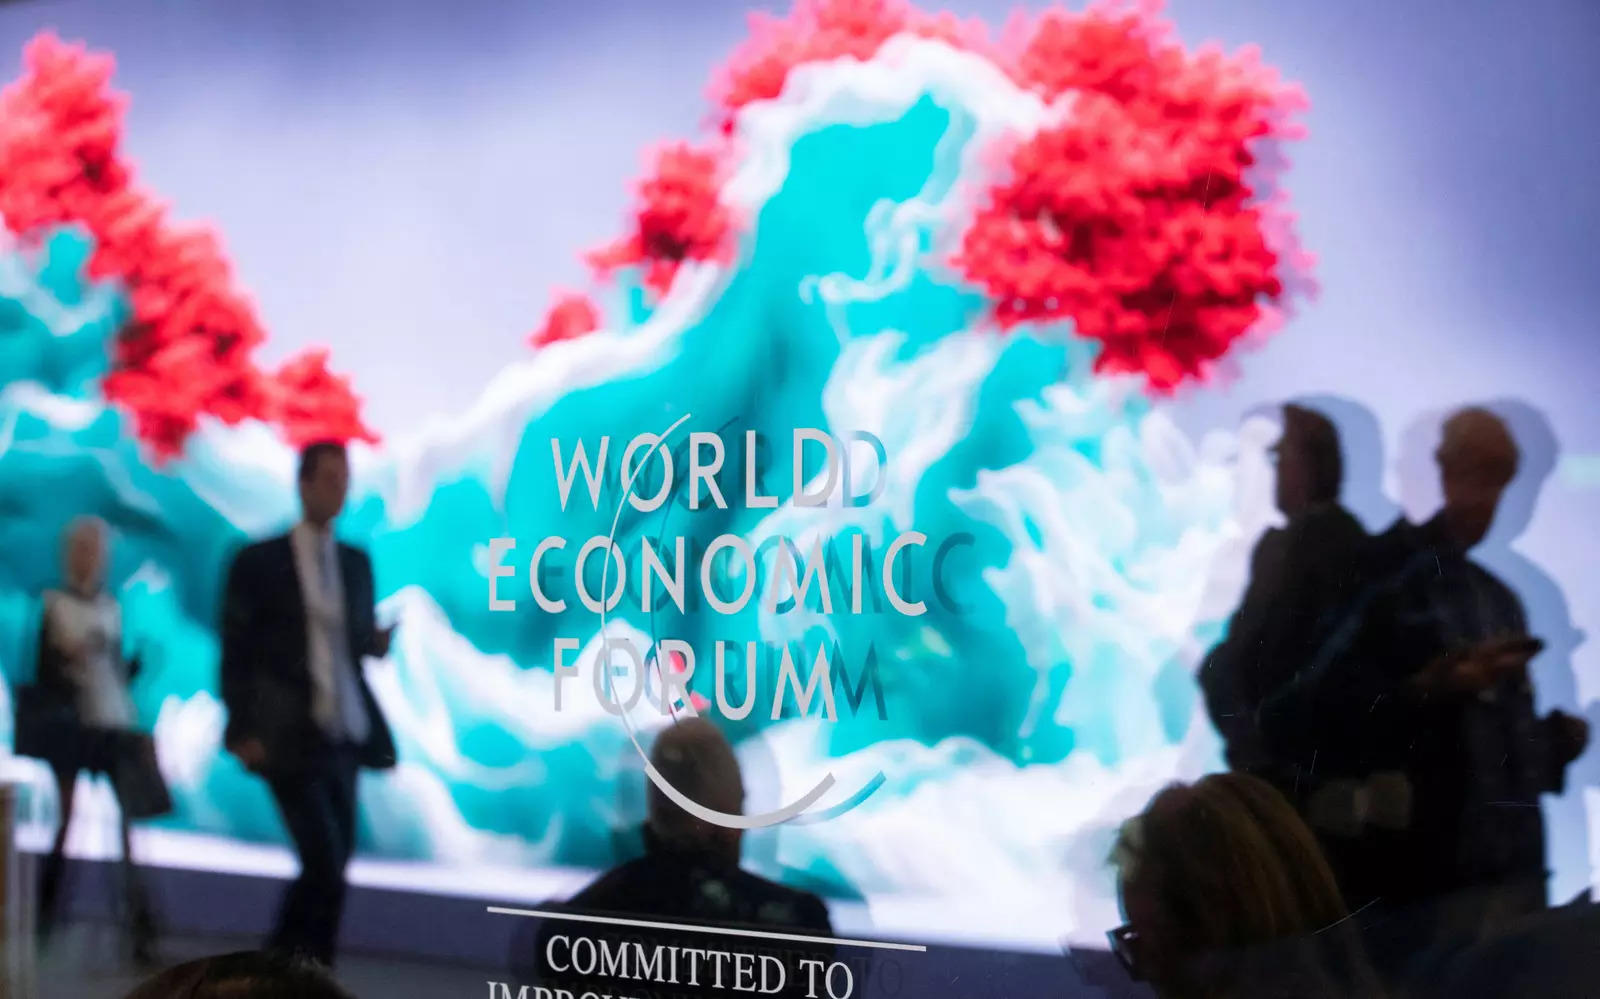  The data sculpture &quot;Artificial Realities: Coral&quot; by Turkish-born artist Refik Anadol is reflected in a window at Davos Congress Centre, the venue of the World Economic Forum (WEF) 2023, in the Alpine resort of Davos, Switzerland, January 17, 2023. REUTERS/Arnd Wiegmann